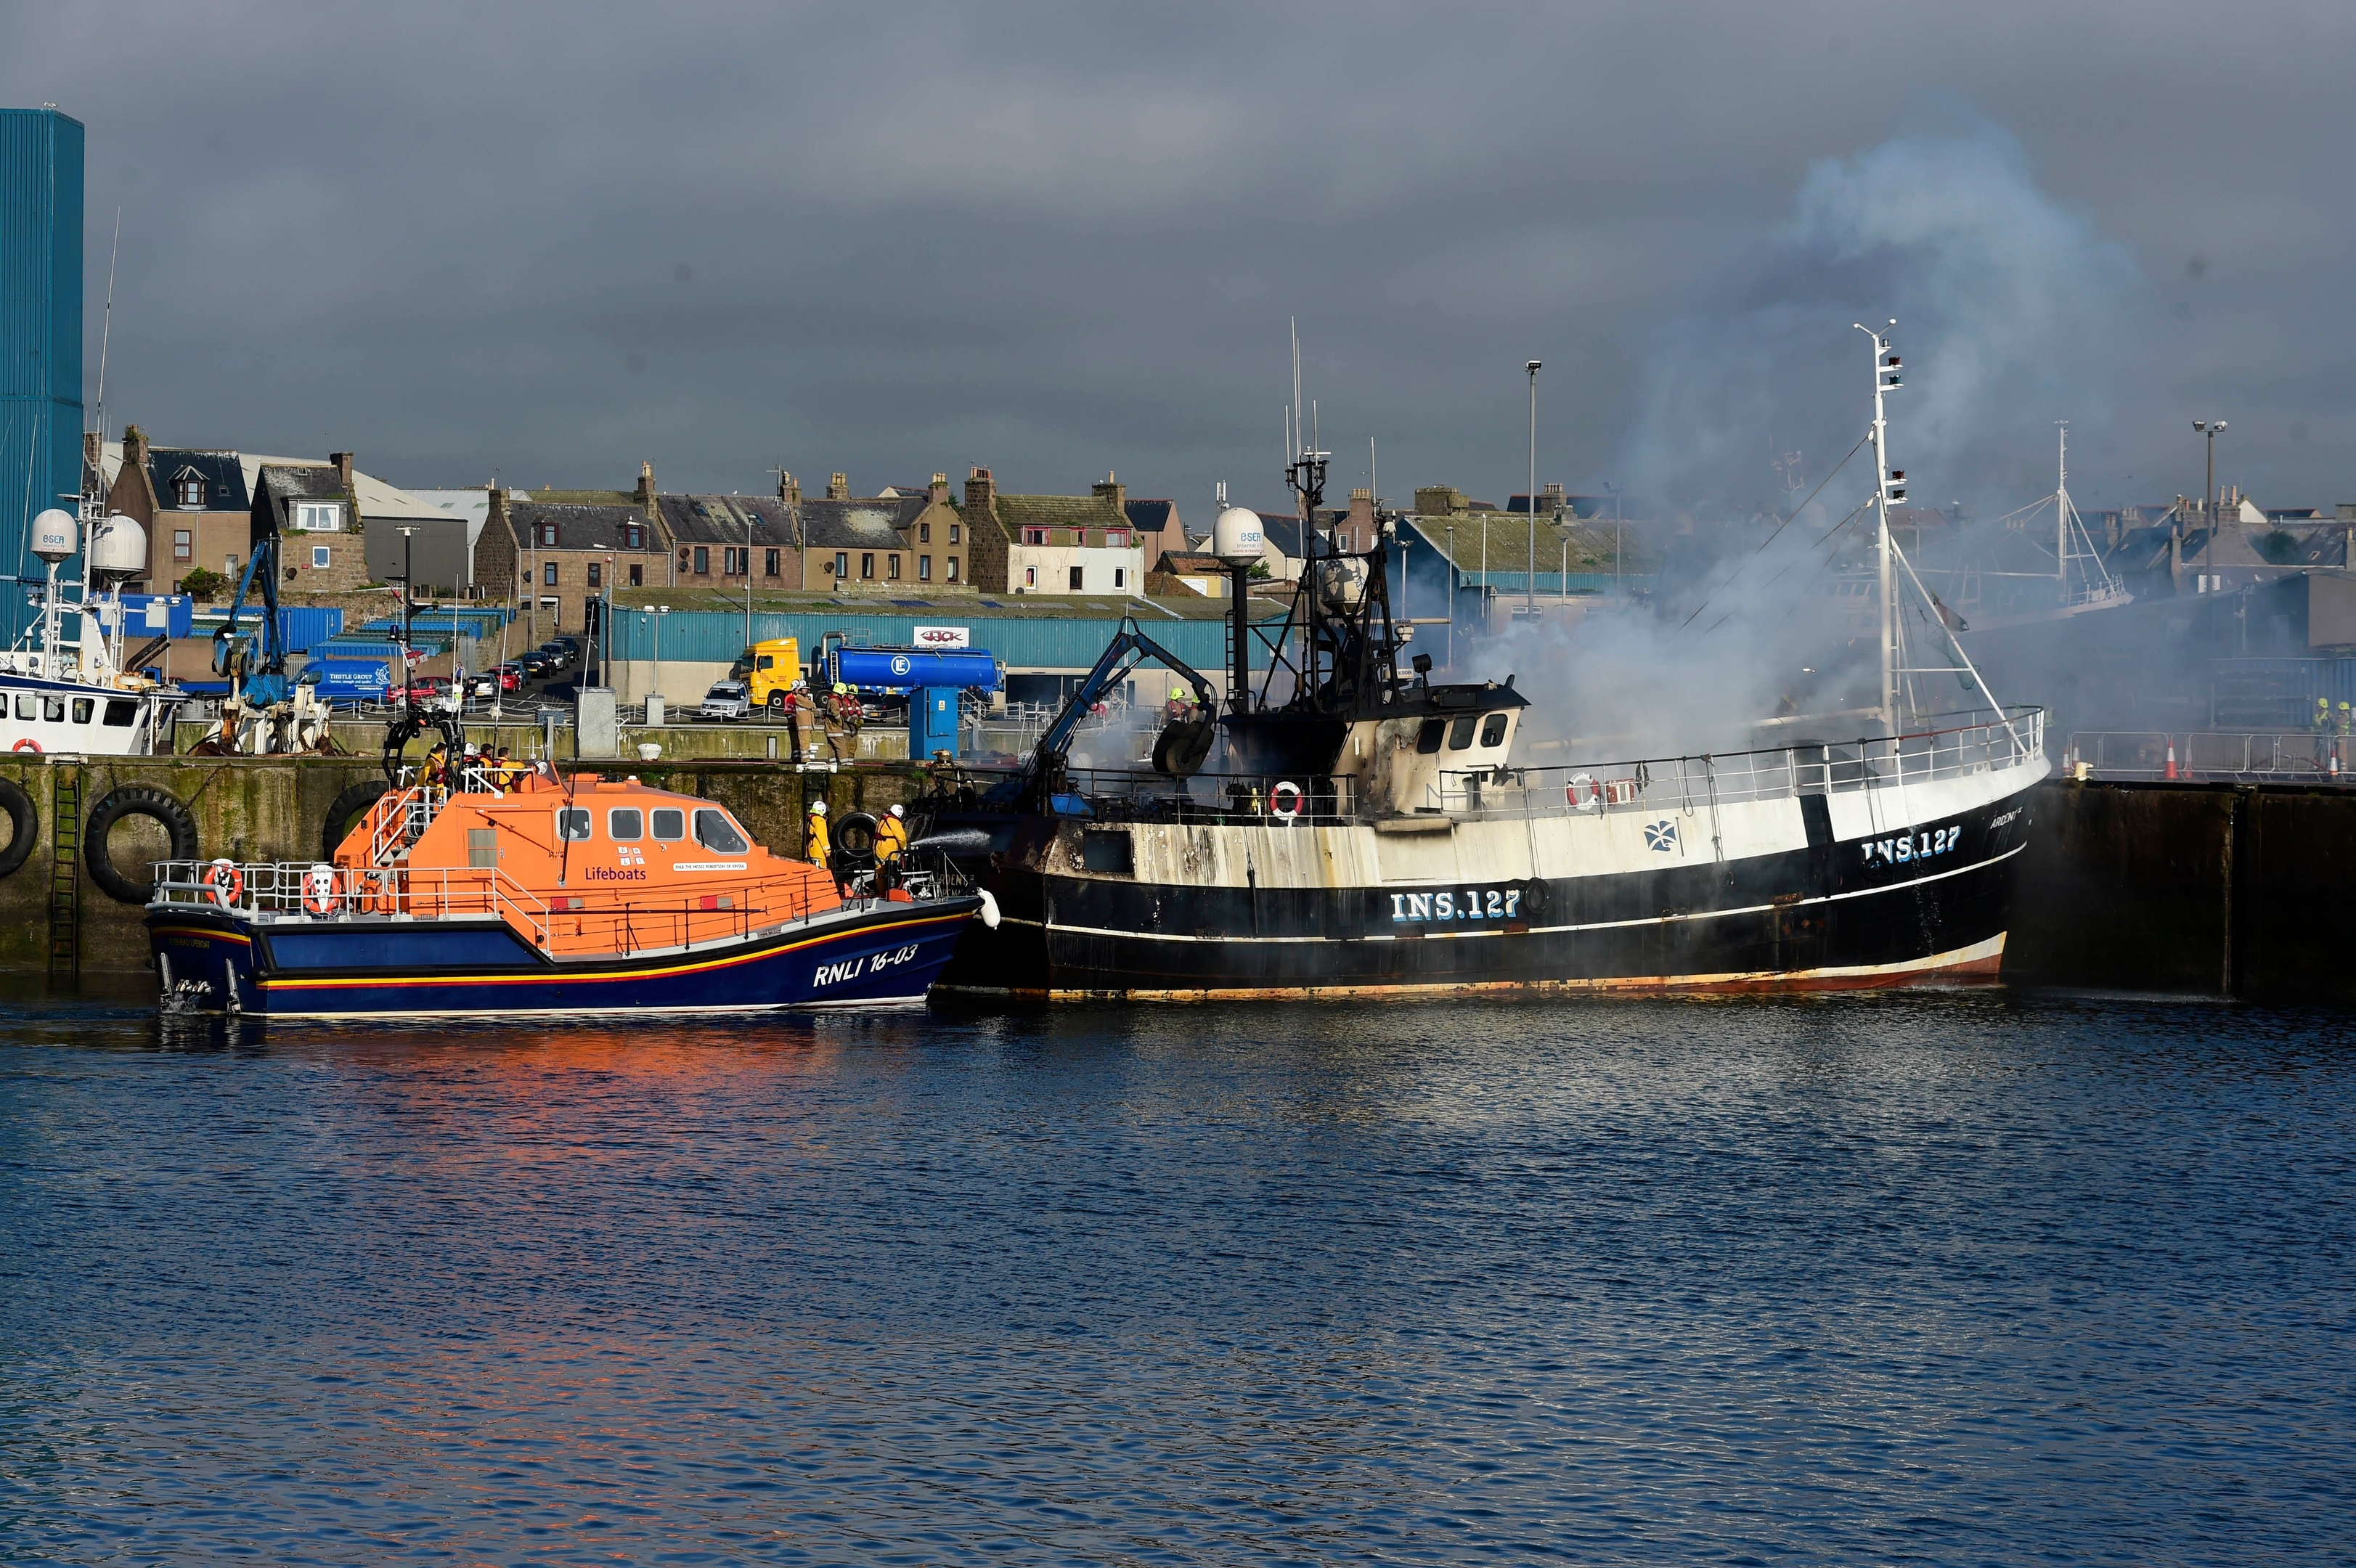 The boat on fire in Peterhead Harbour